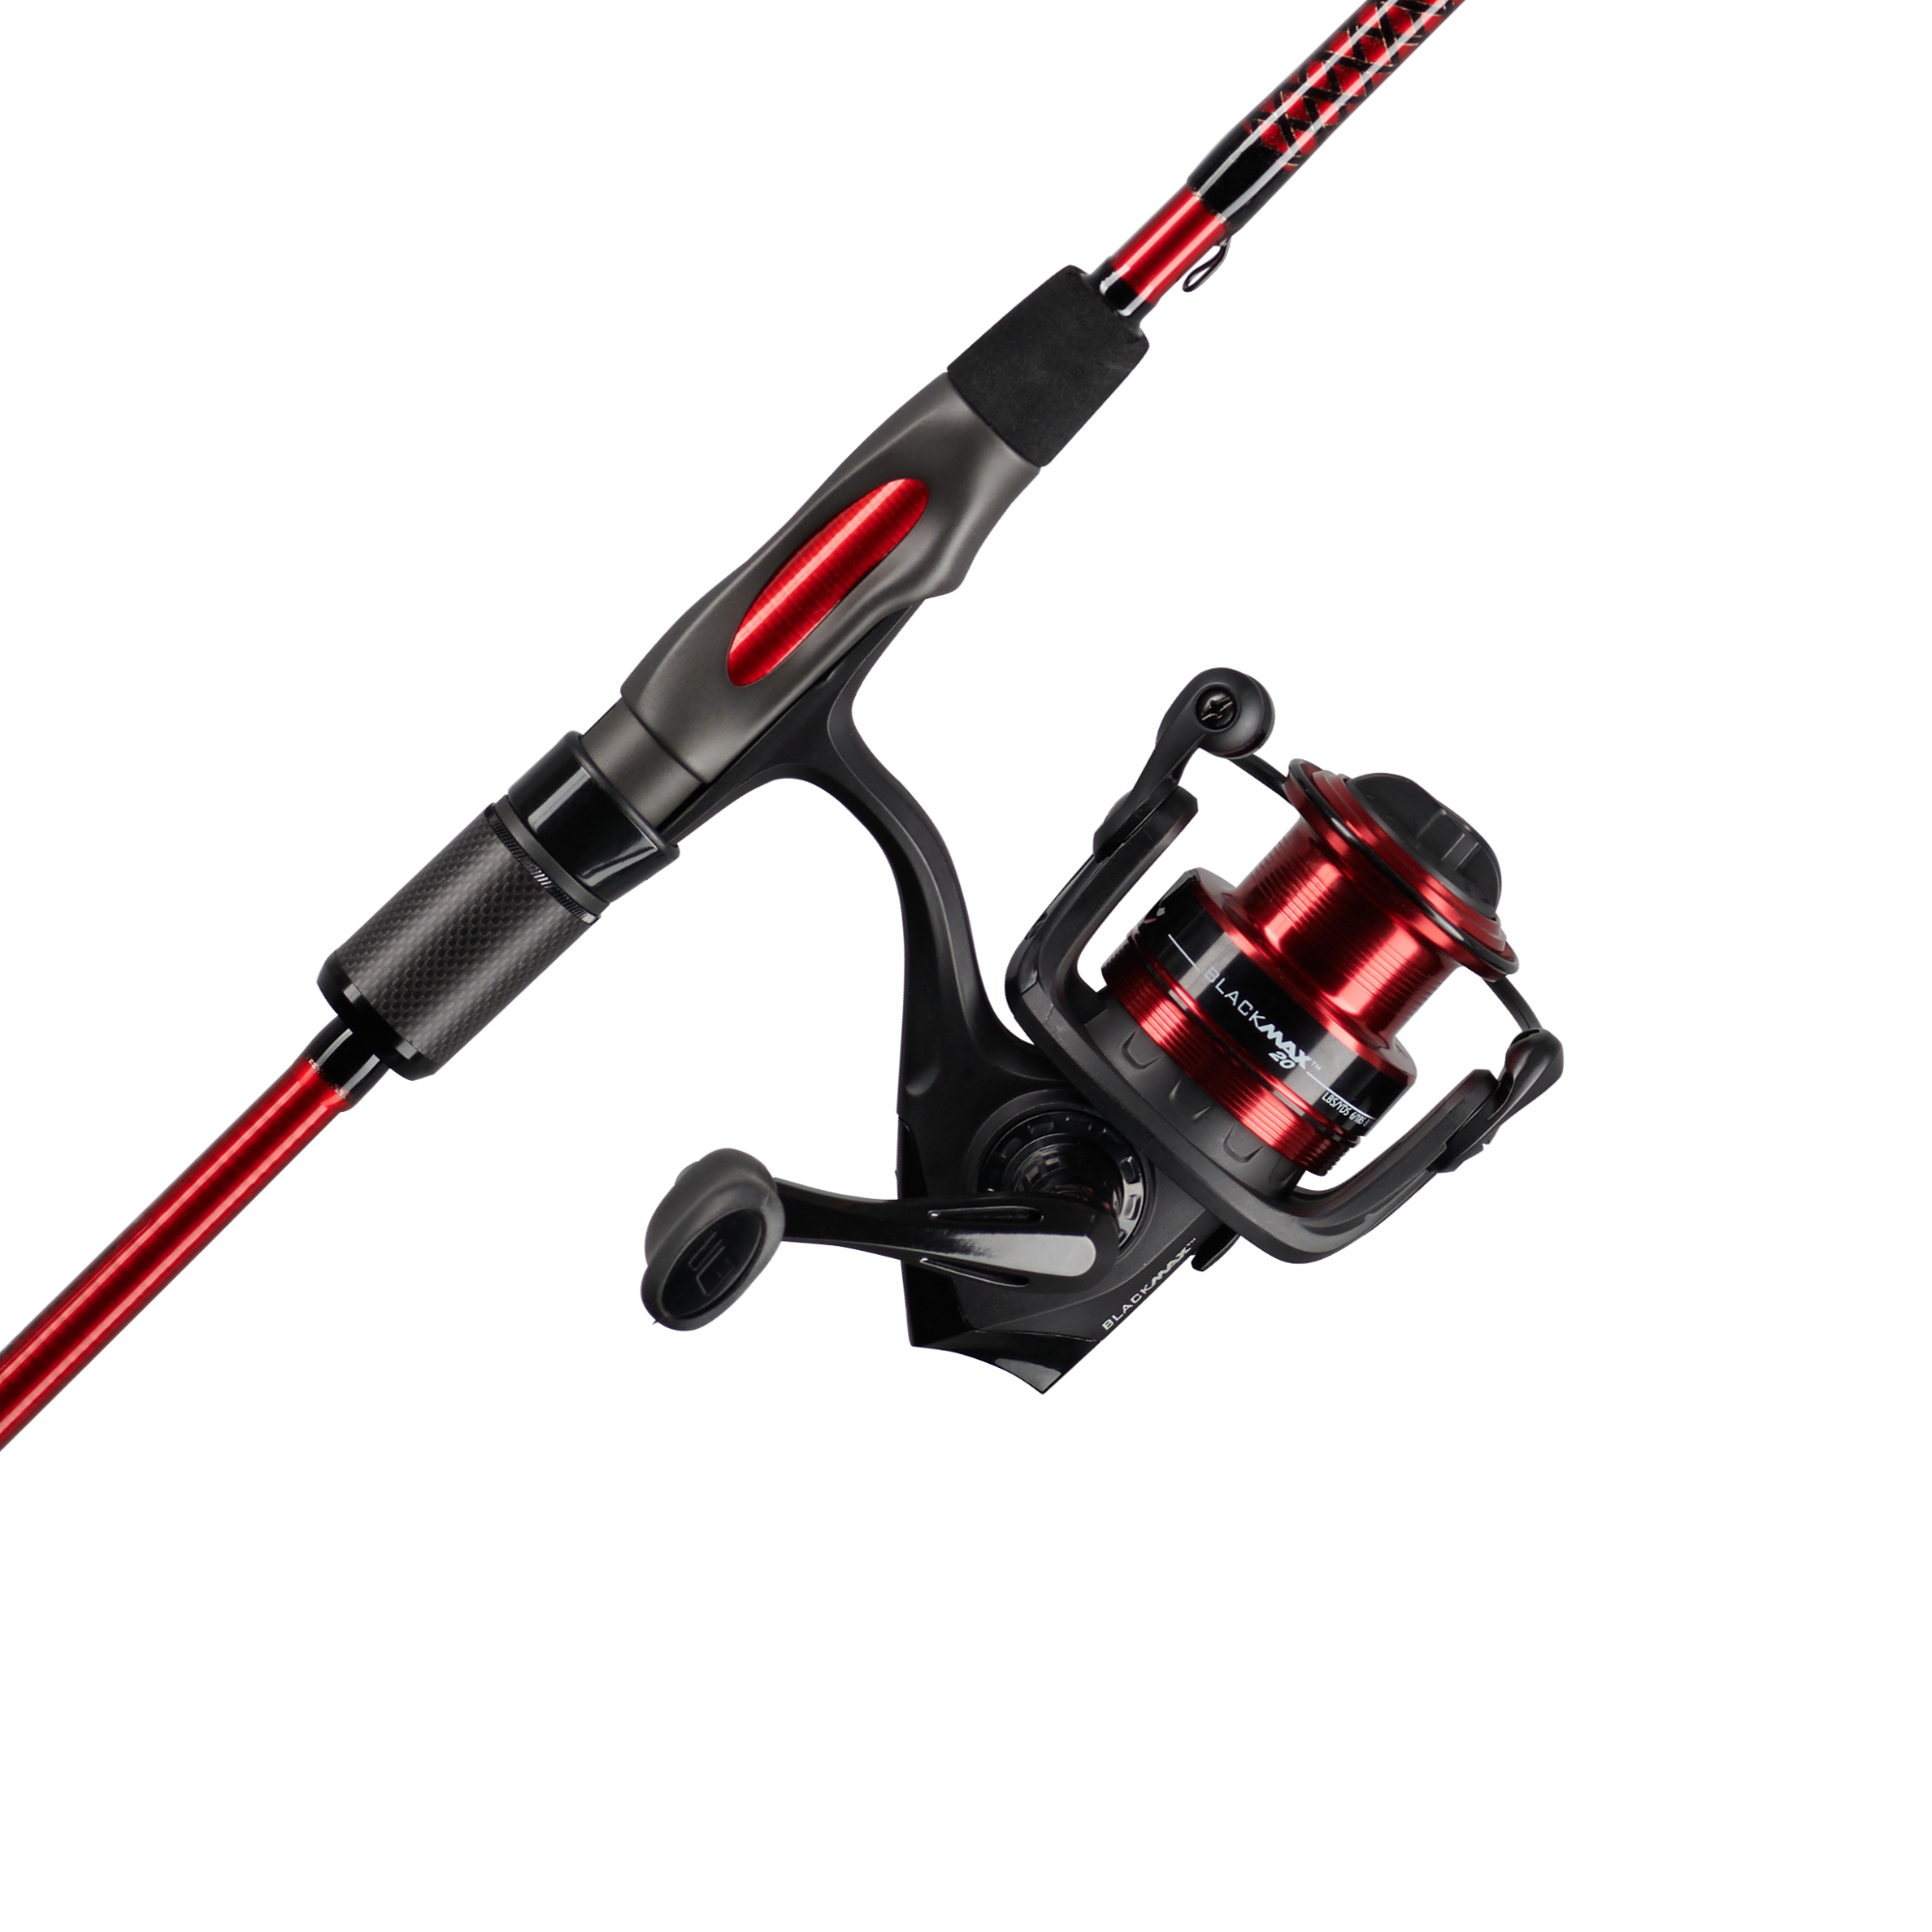 Ugly Stik 6’6” Carbon Spinning Fishing Rod and Reel Spinning Combo - image 1 of 5